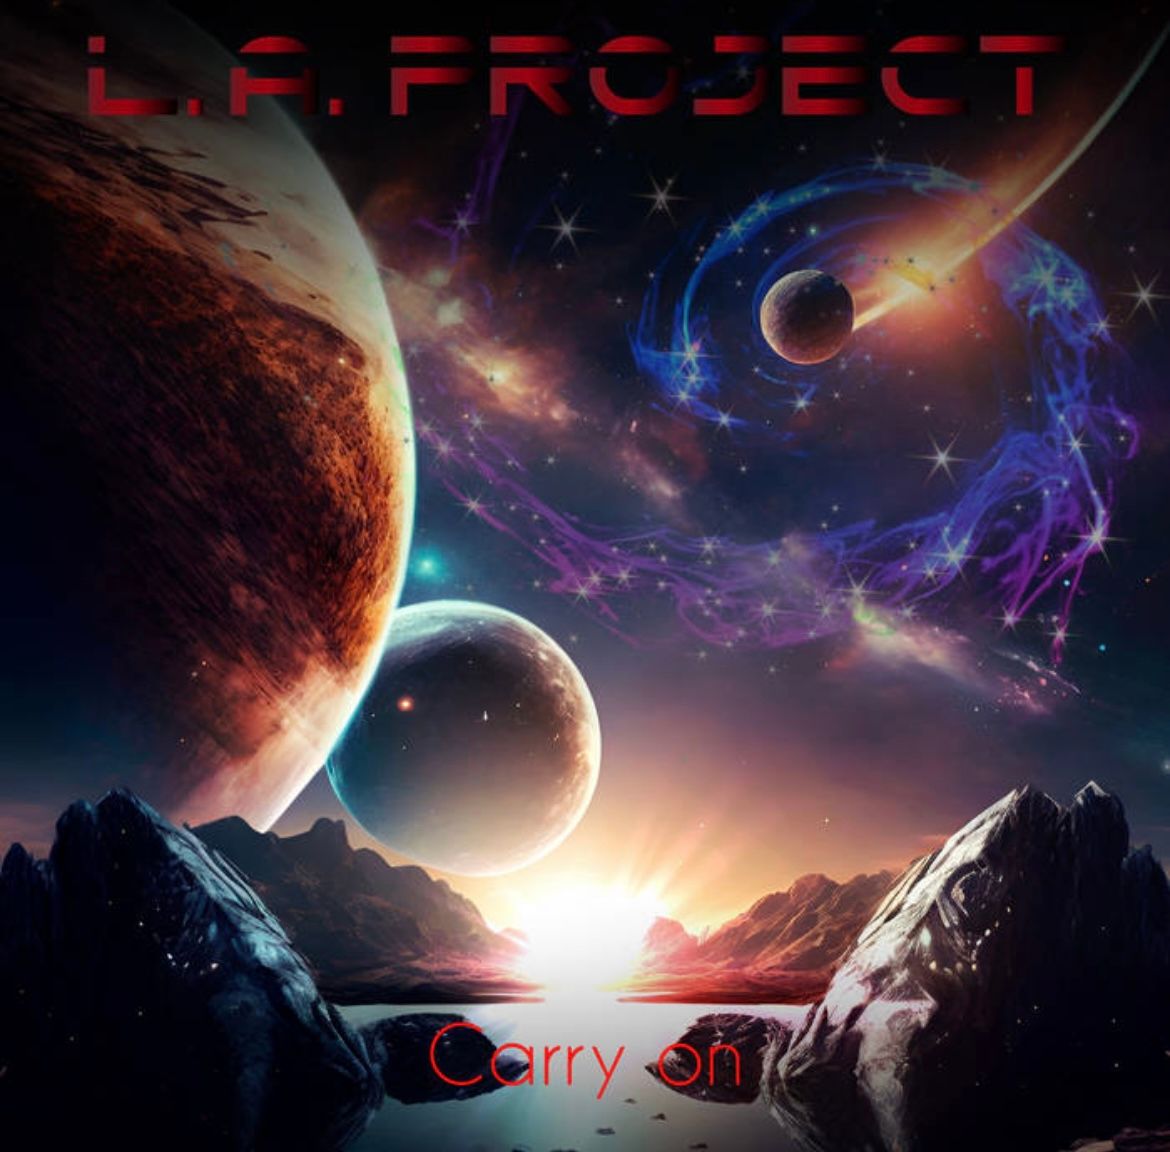 Song Review | "Carry on" - L.A. Project